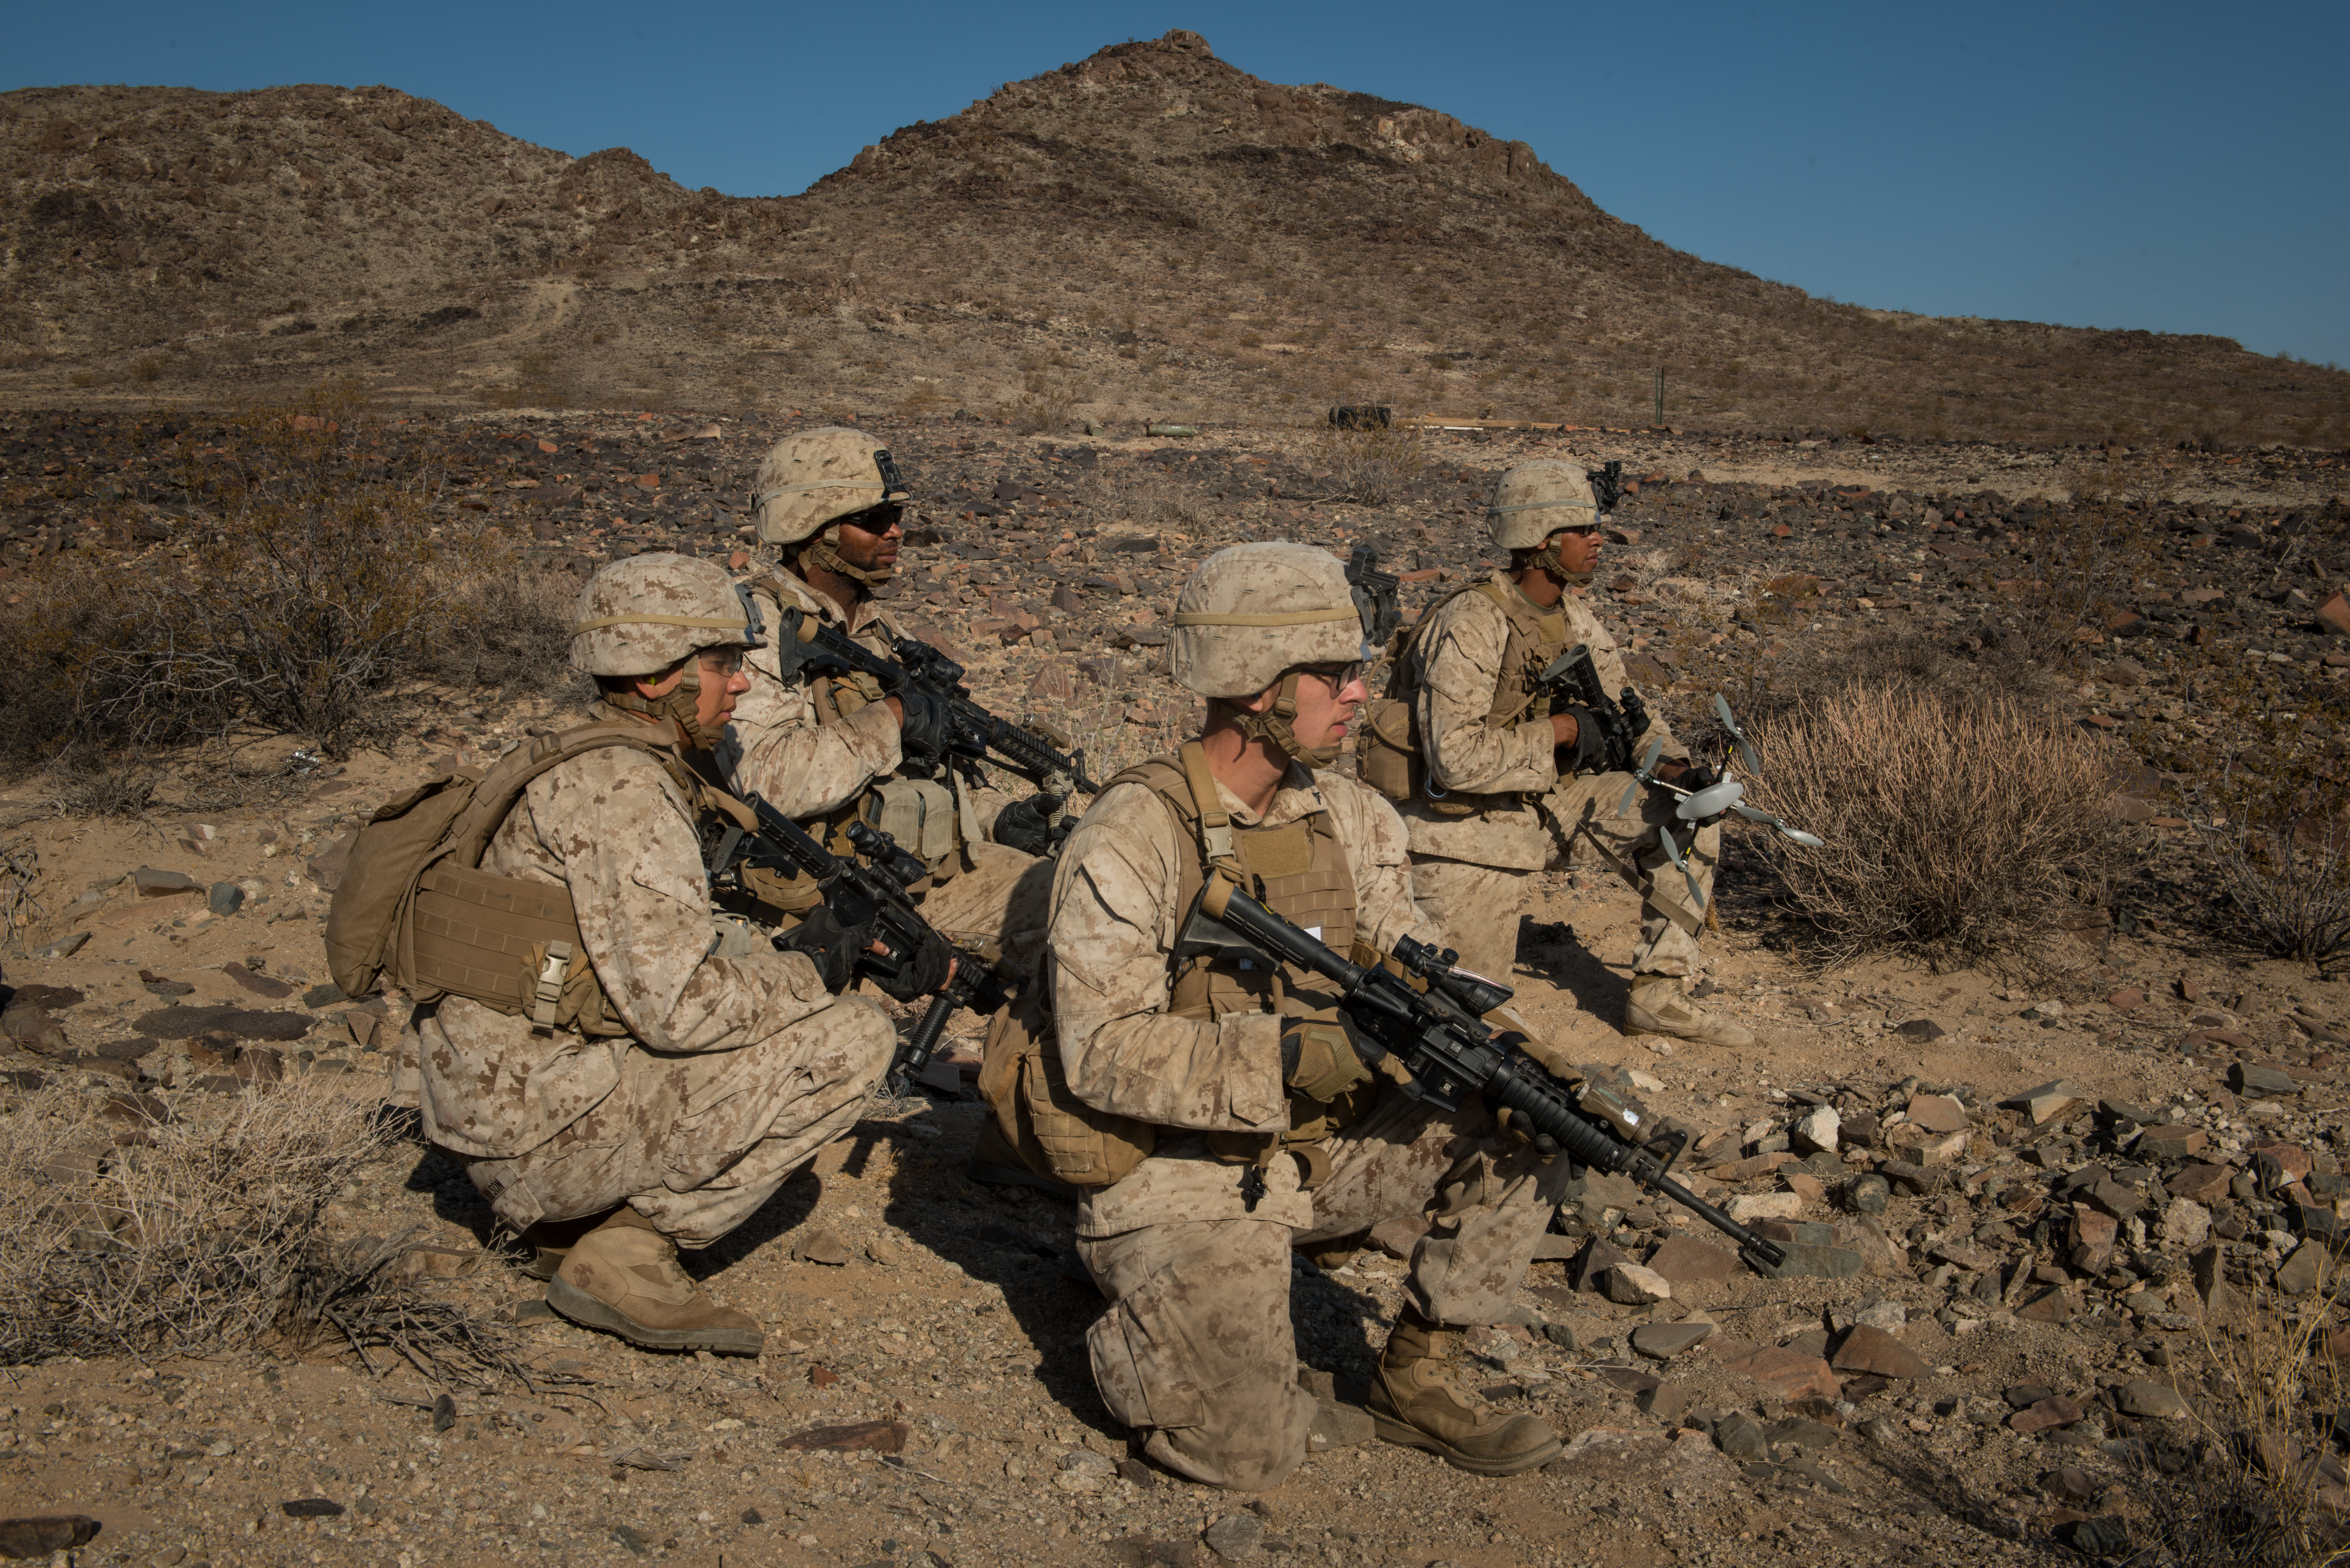 Marines with Kilo Company, 3rd Battalion, 5th Marine Regiment, prepare to raid a simulated enemy position during the Marine Air-Ground Task Force Integrated Experiment (MIX-16) at Marine Corps Air Ground Combat Center Twentynine Palms, Calif., Aug. 5, 2016. US Marine Corps photo.